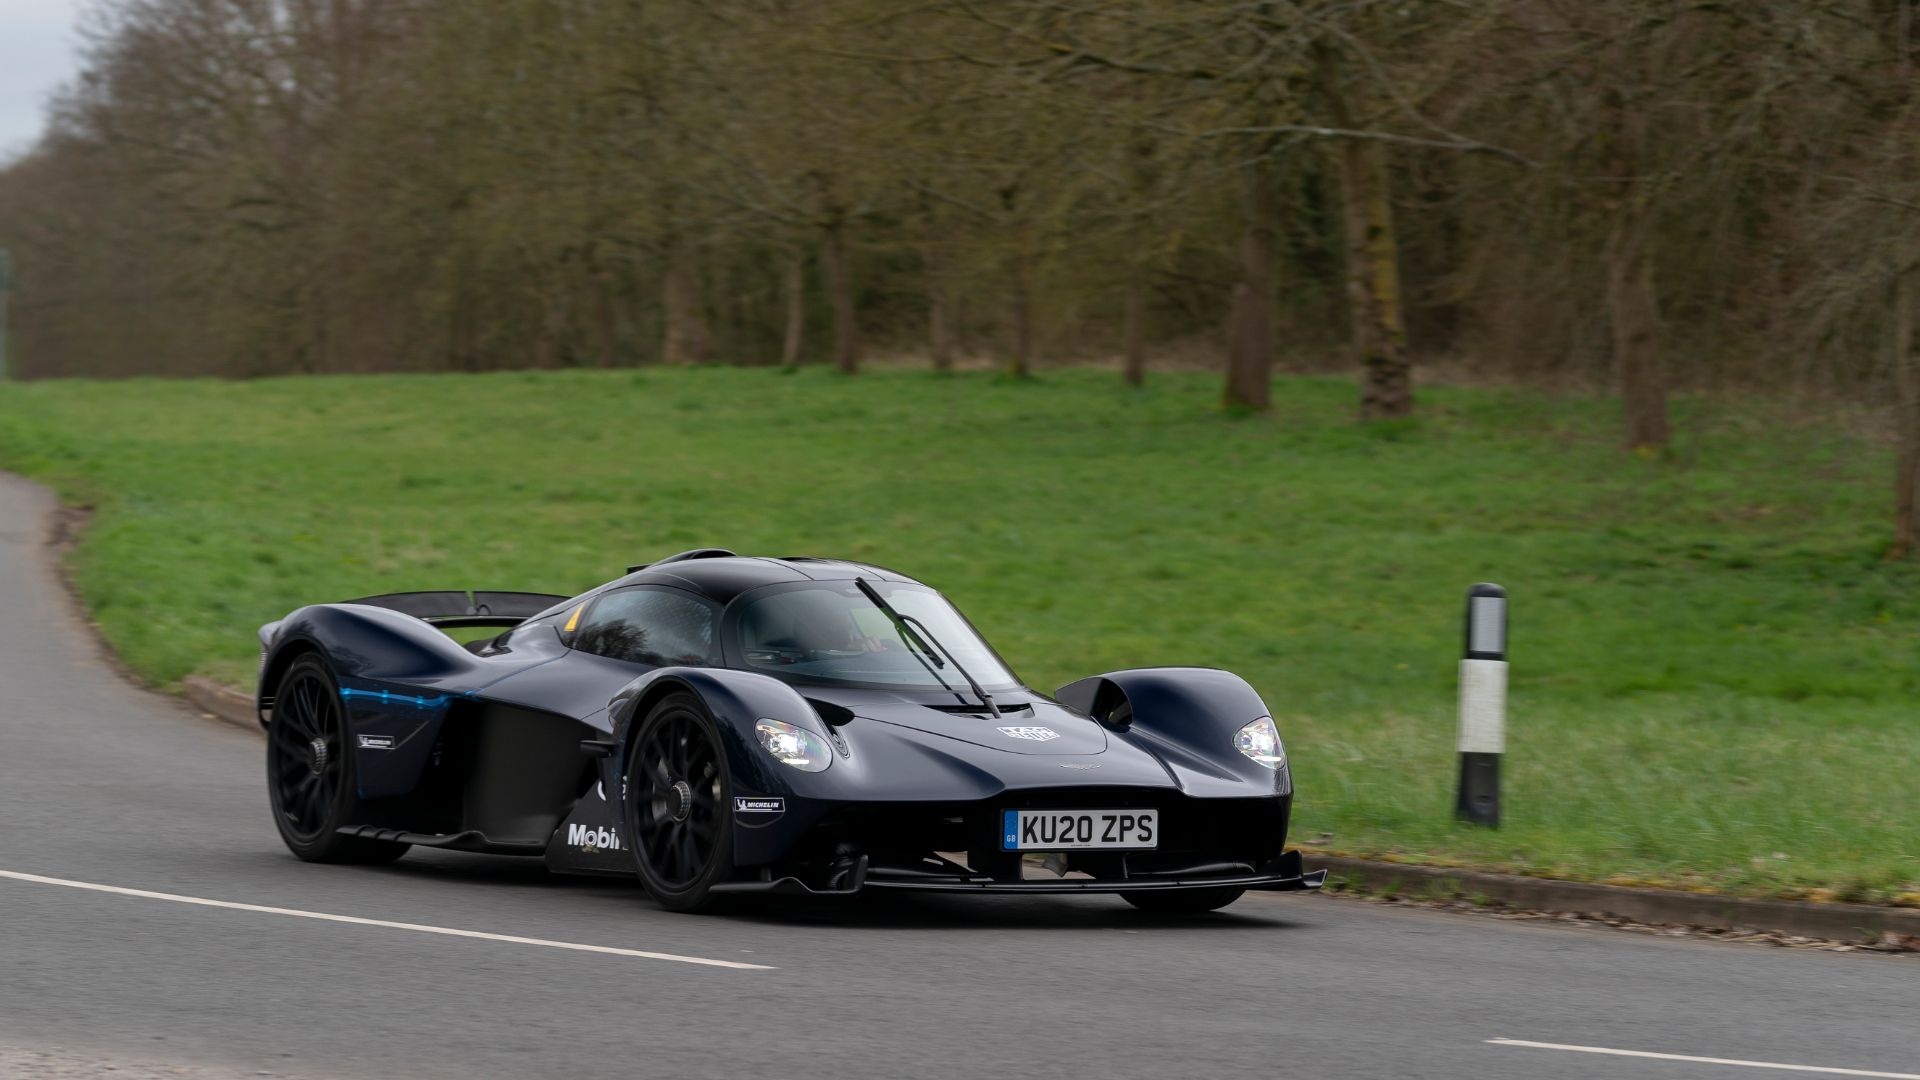 Aston Martin Valkyrie testing on the road